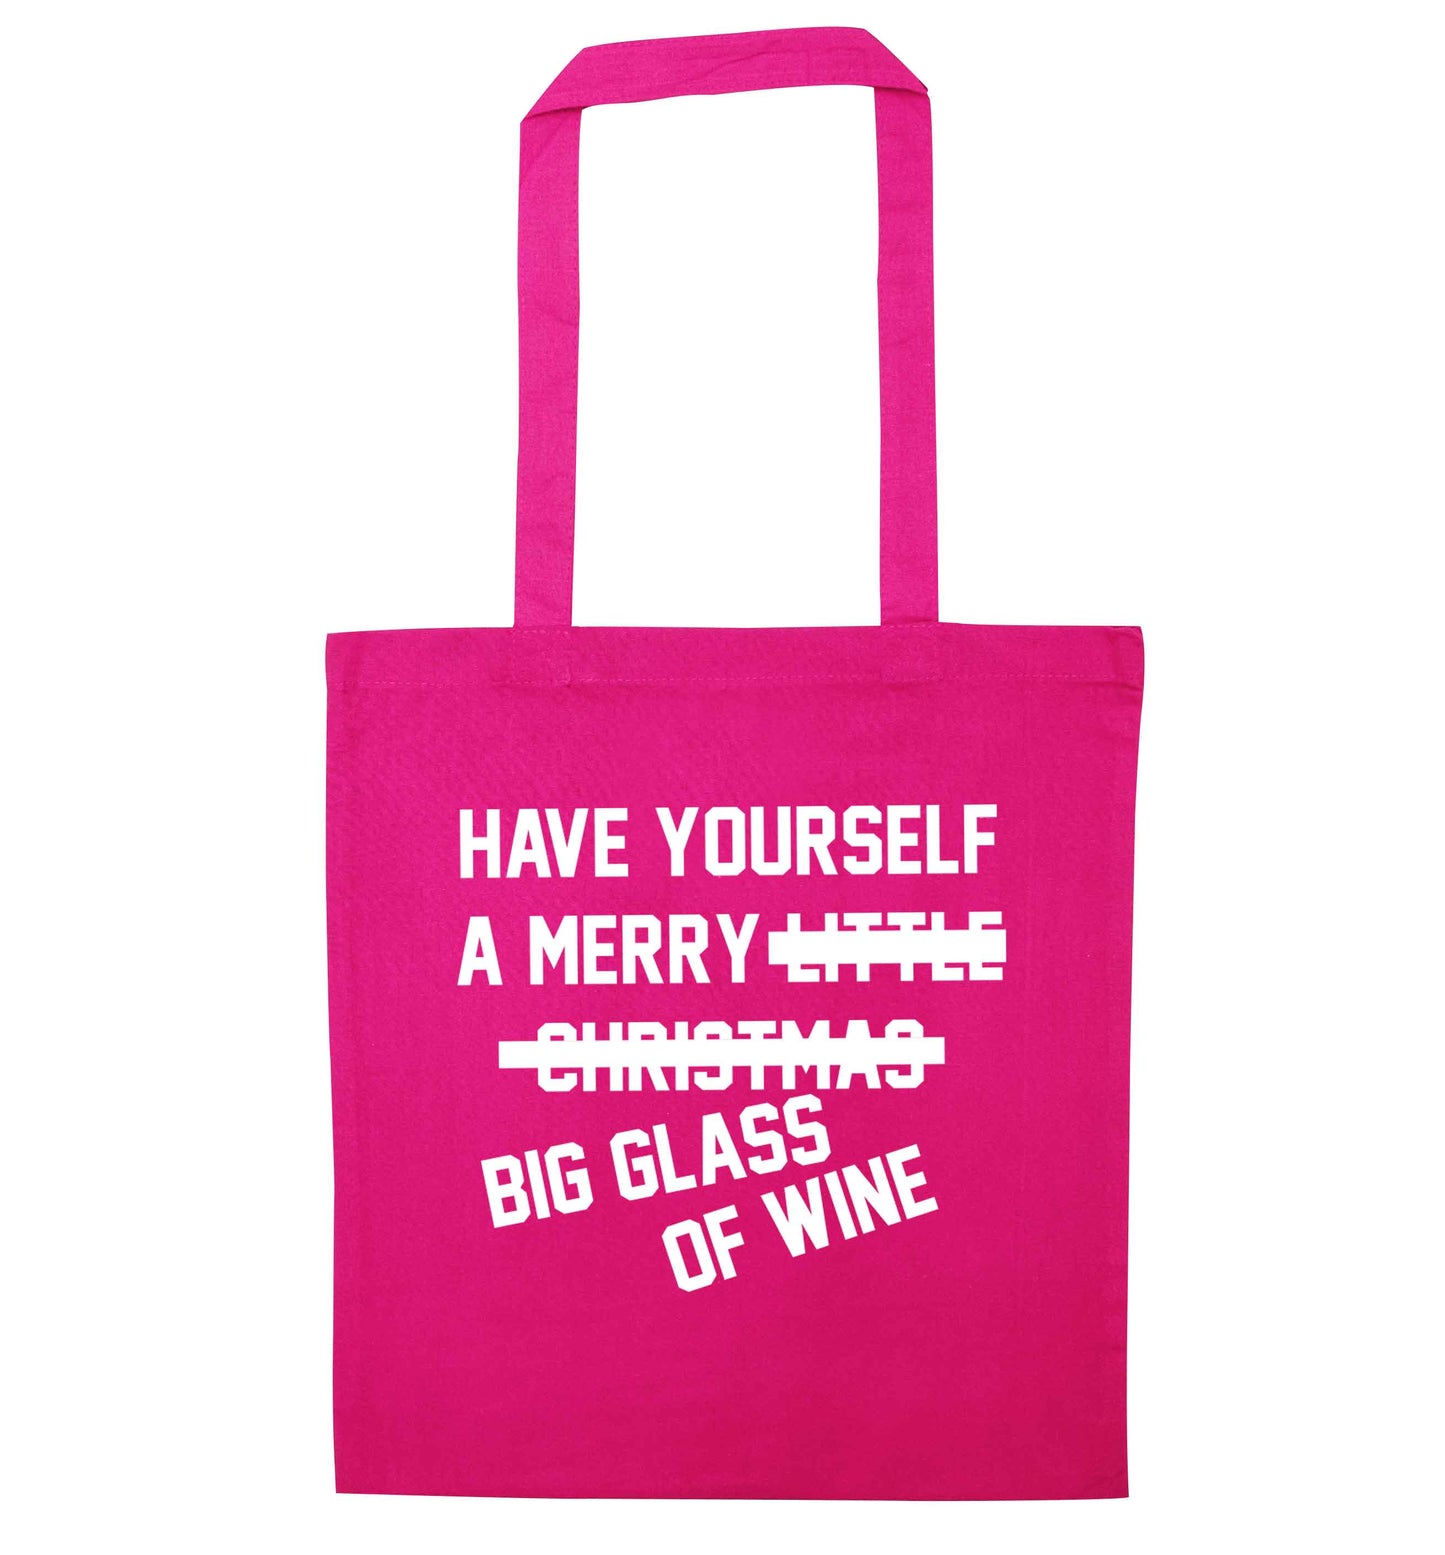 Have yourself a merry big glass of wine pink tote bag